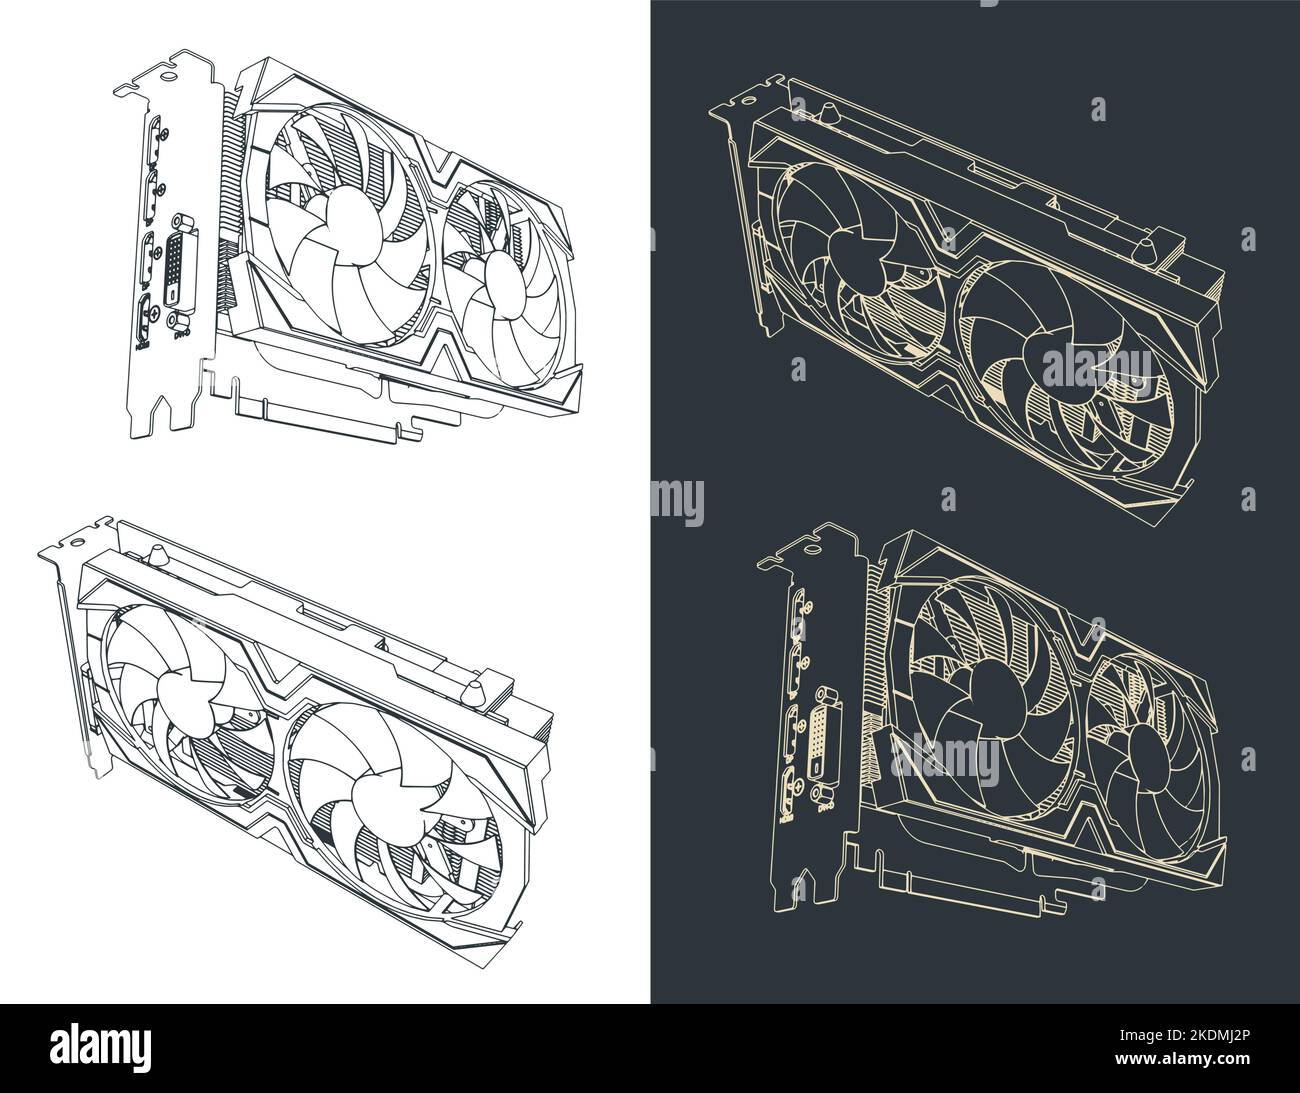 Stylized vector illustrations of a powerful graphics card Stock Vector